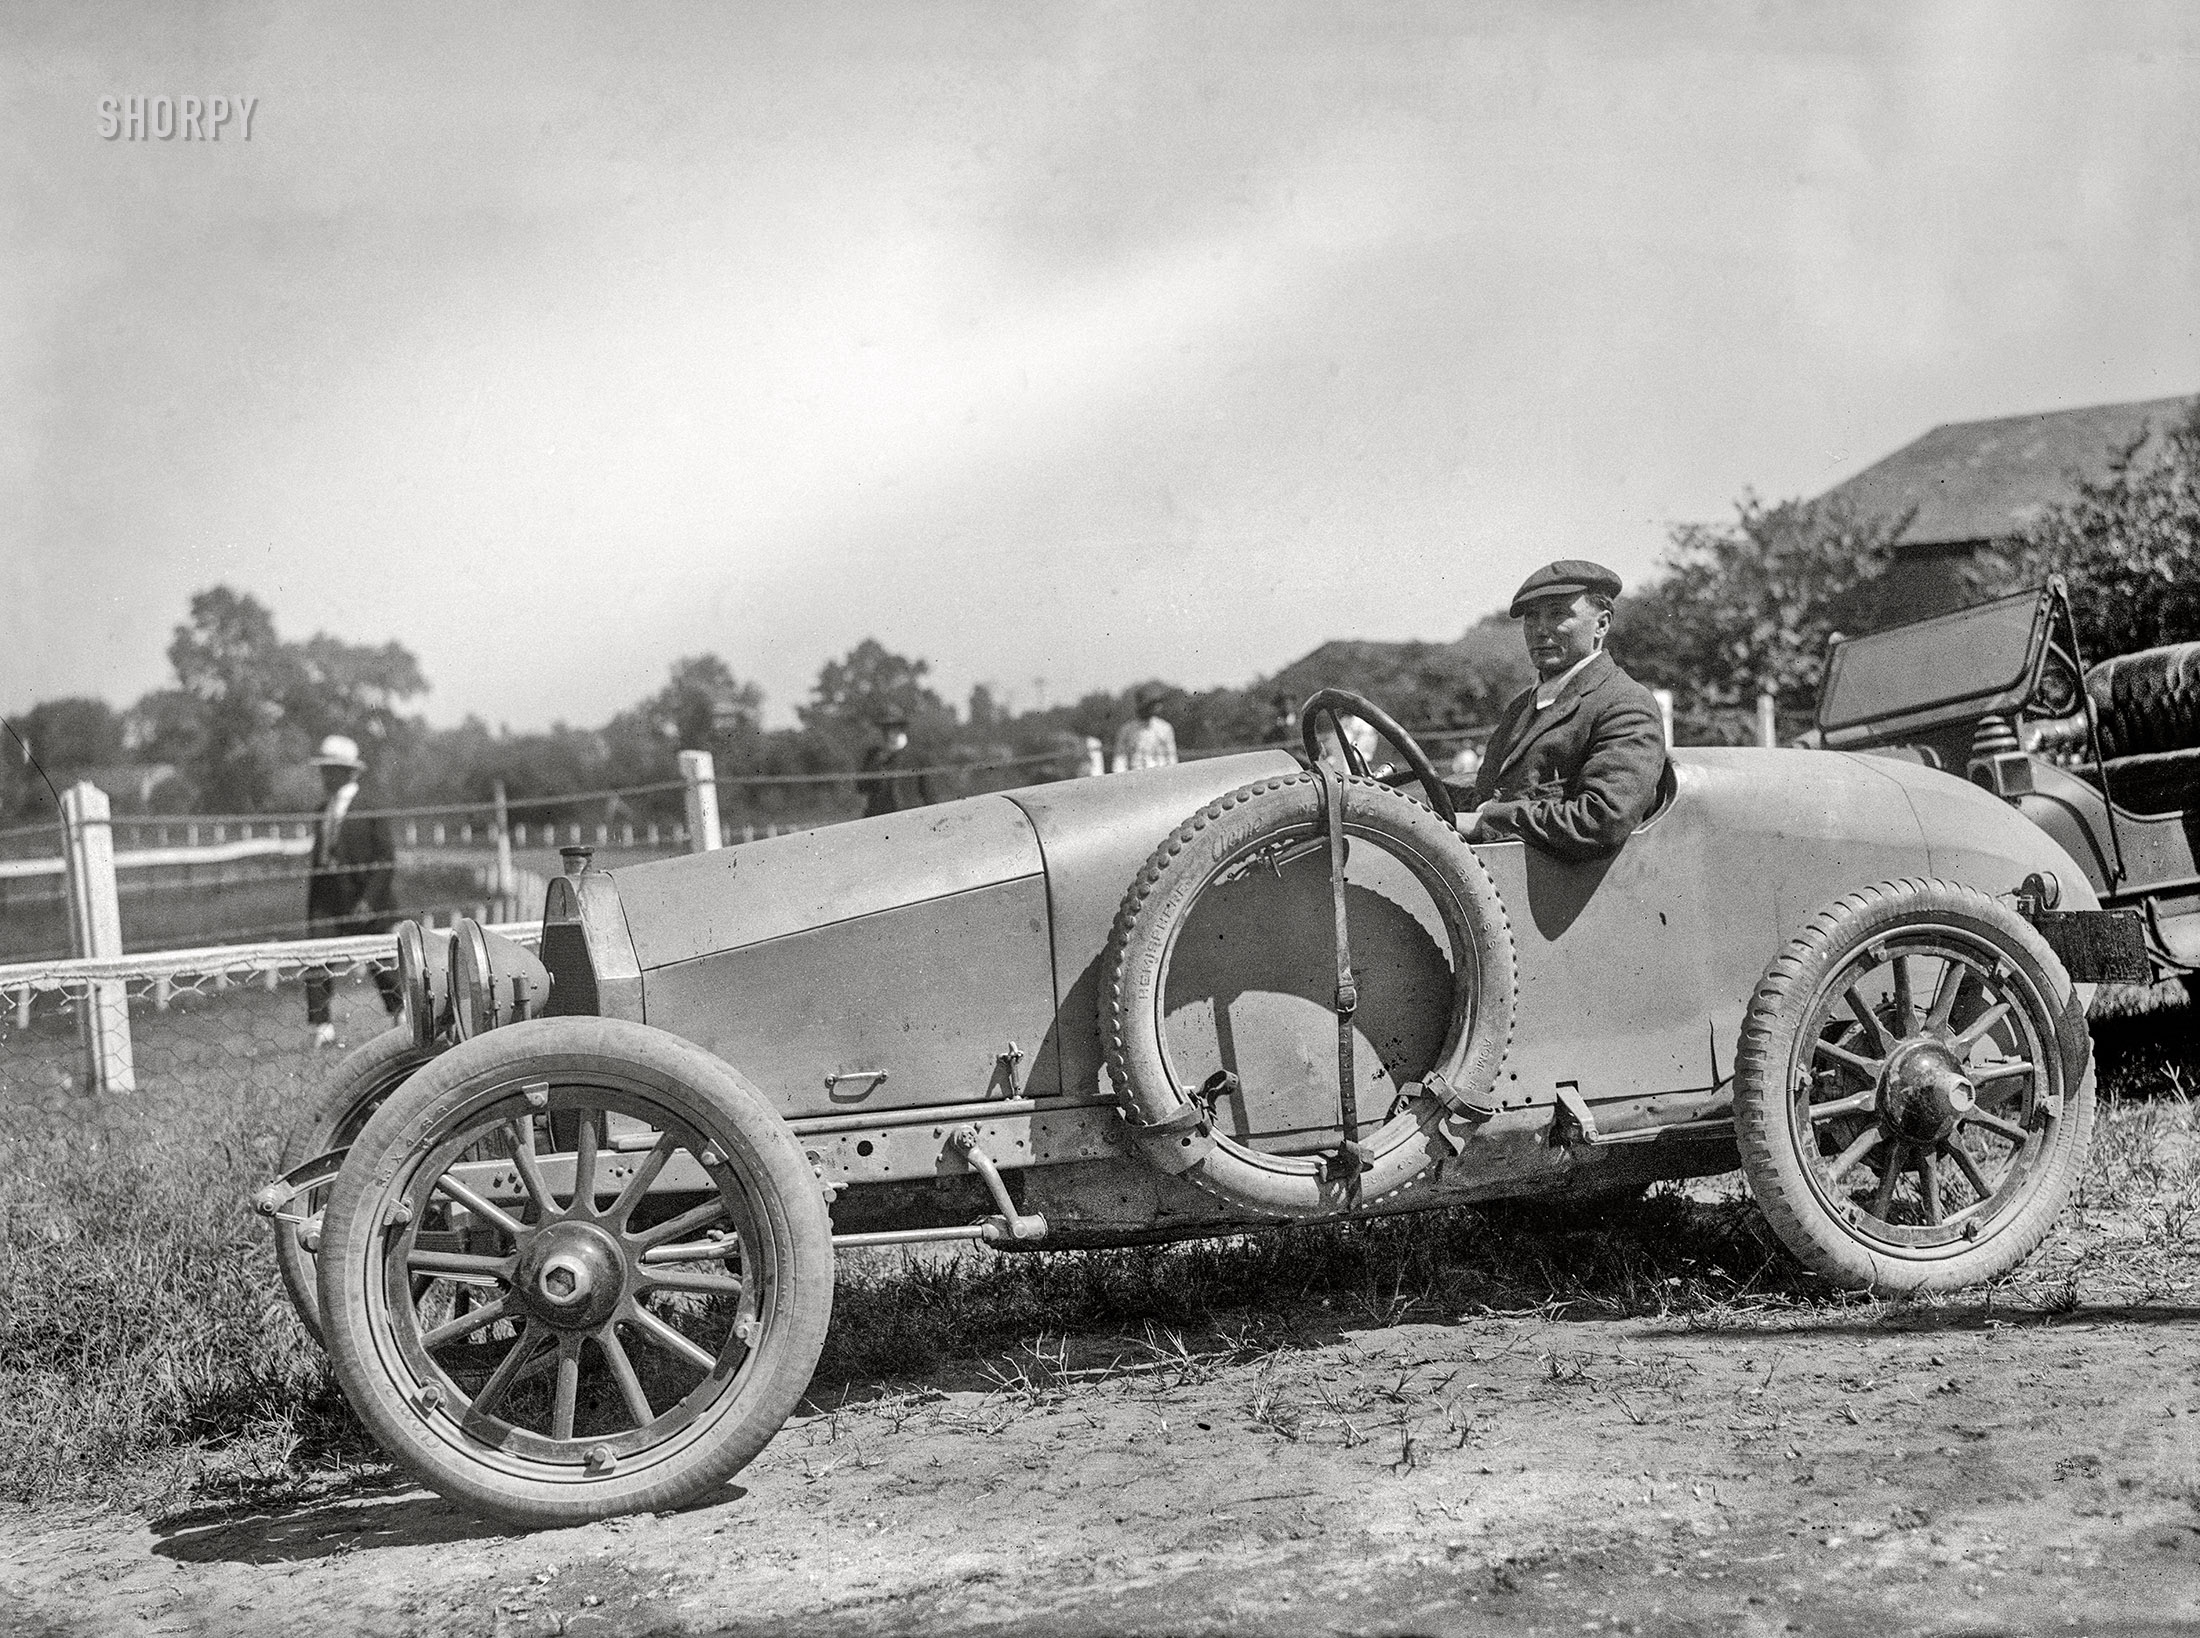 Washington, D.C. "Labor Day, 1916. Auto races at Benning track." Where one man's luck is riding on Acme Hemispheres. National Photo Company glass negative. View full size.